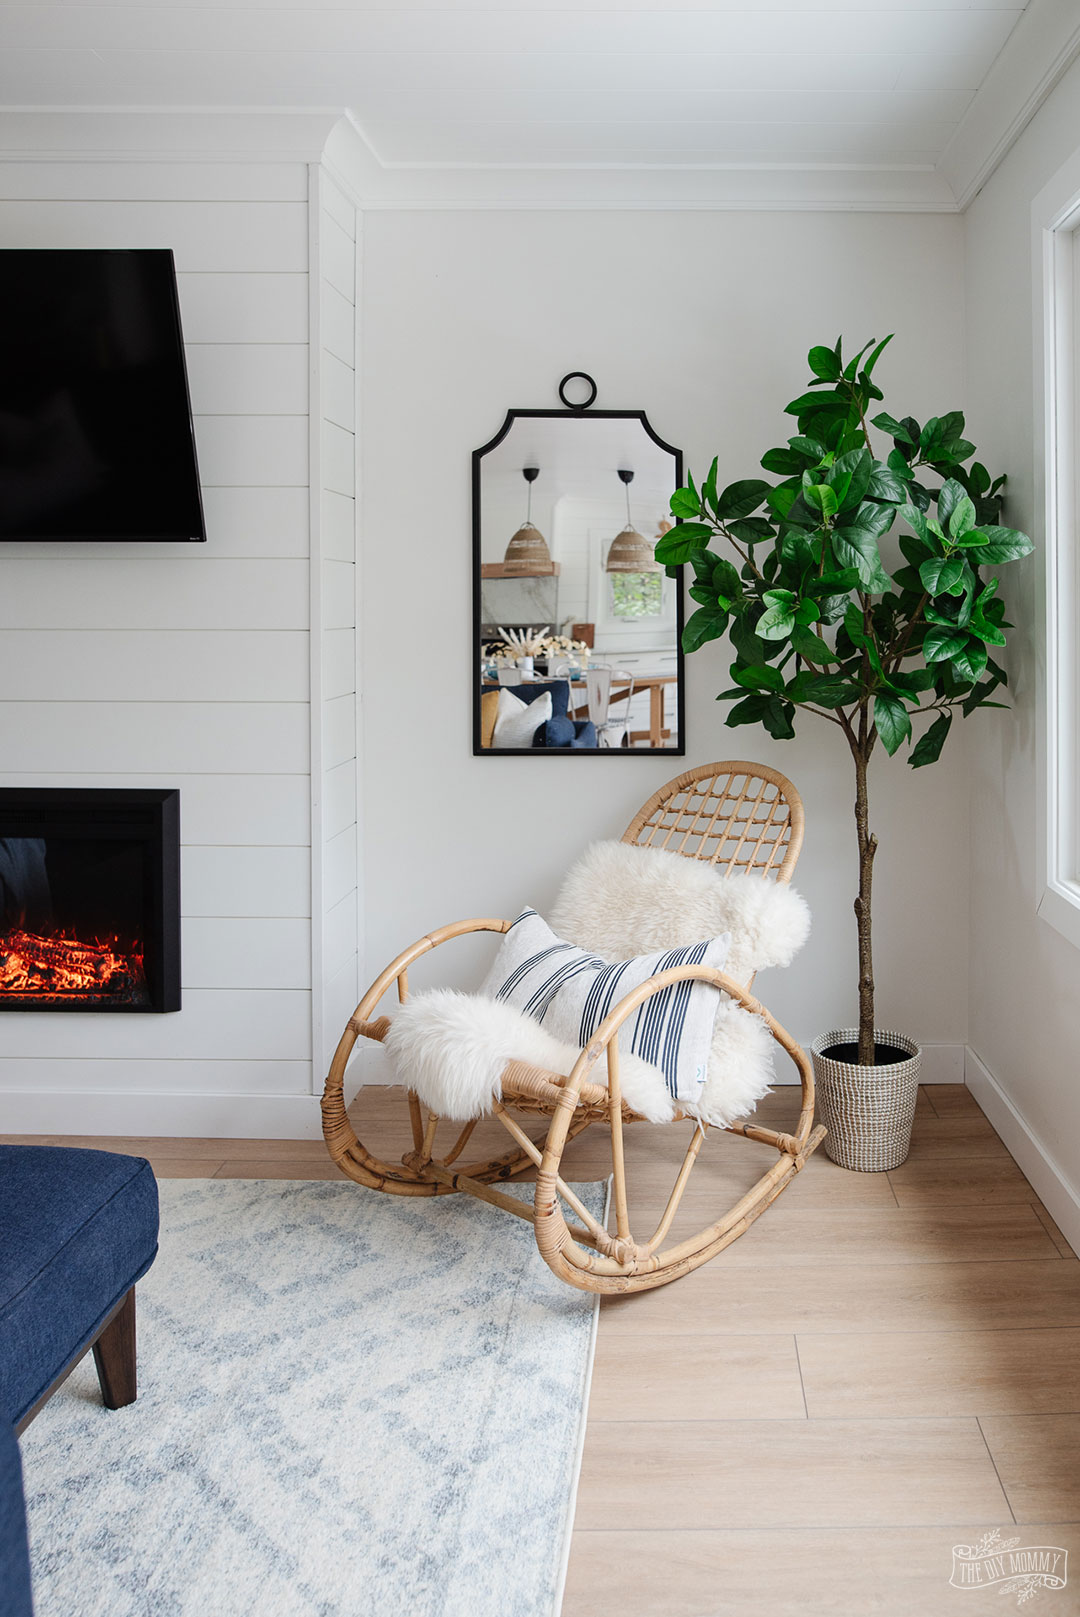 See how a boring, dated living room was transformed into a coastal modern farmhouse space with a DIY shiplap fireplace and adorable office nook with storage.